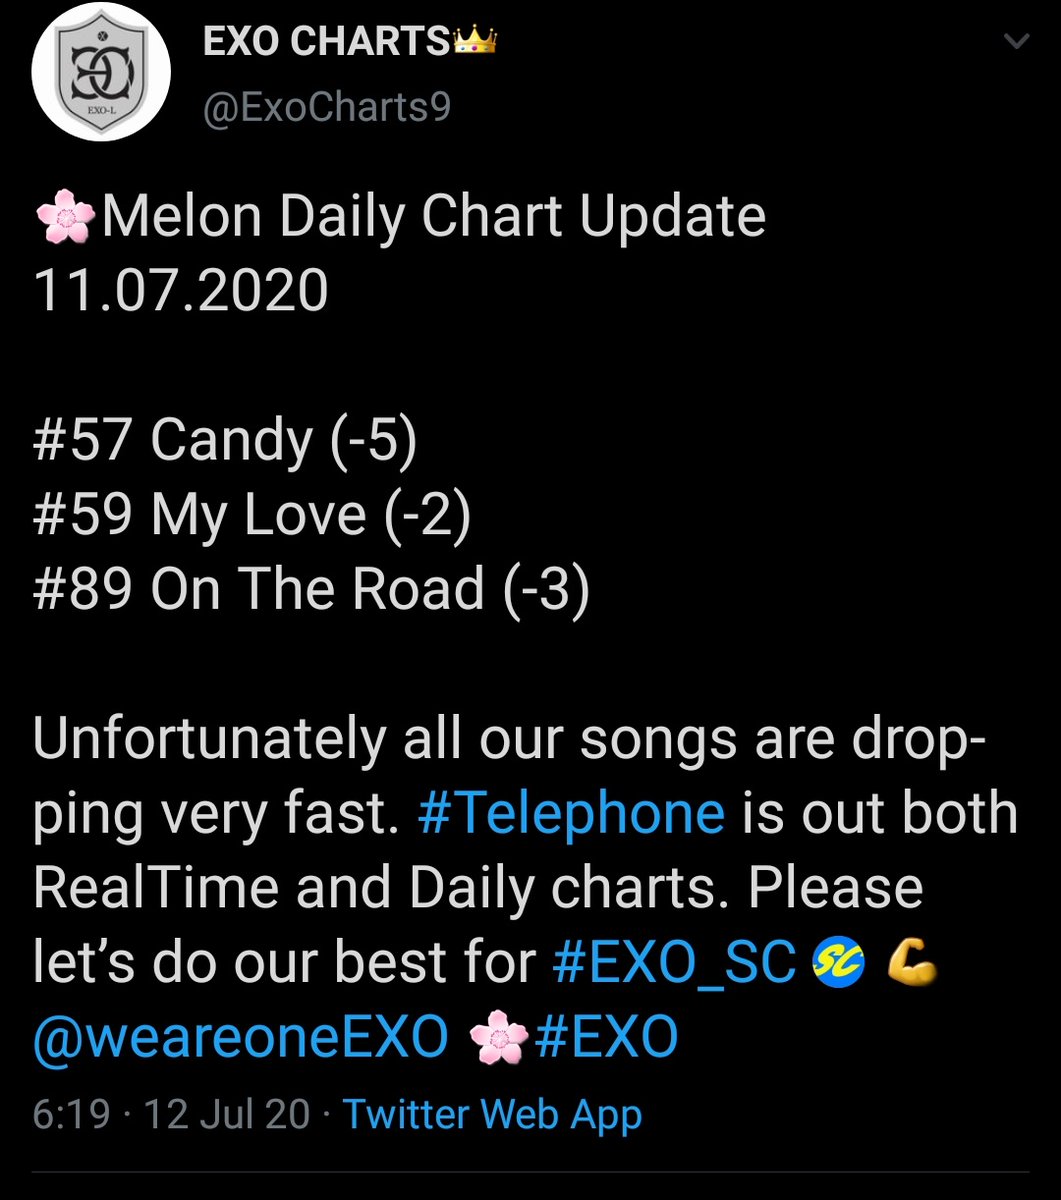 Funfact: until just recently on the road and my love and candy were the only exo songs charting in melon's daily chart.As of now OTR dropped from daily chart but my love and candy still charting at #61 and #59.